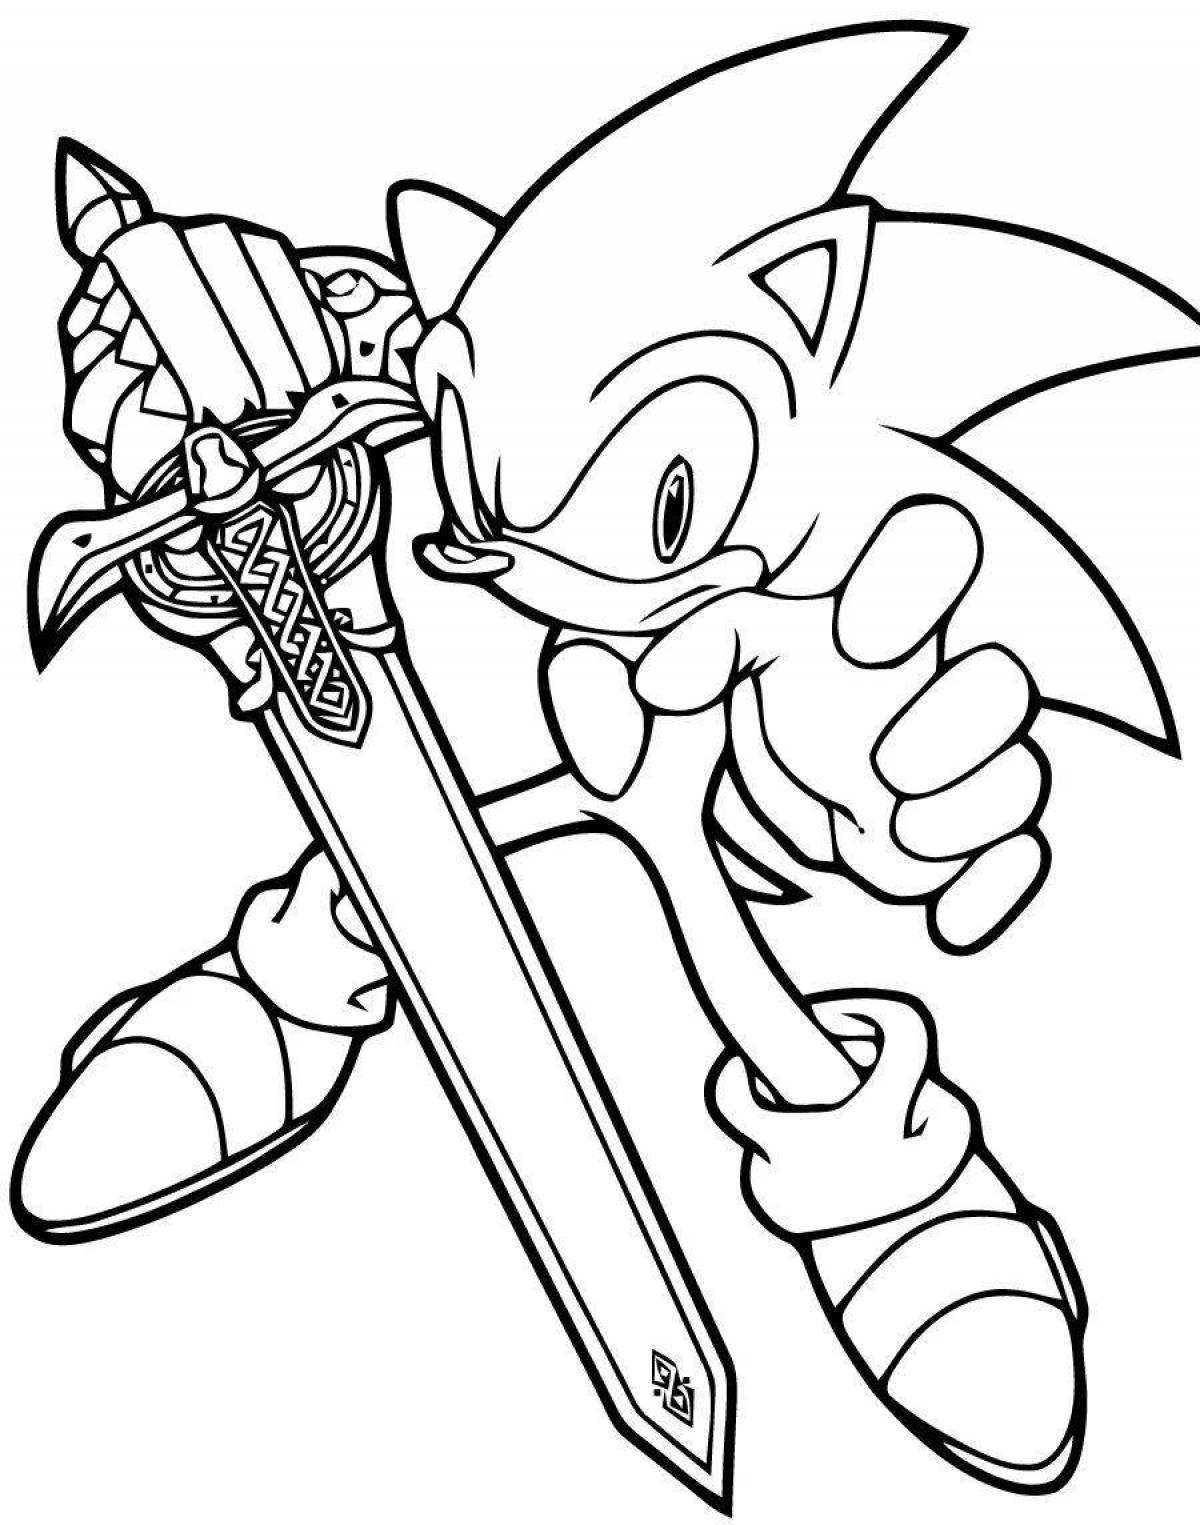 Fabulous sonic coloring book for children 5-6 years old